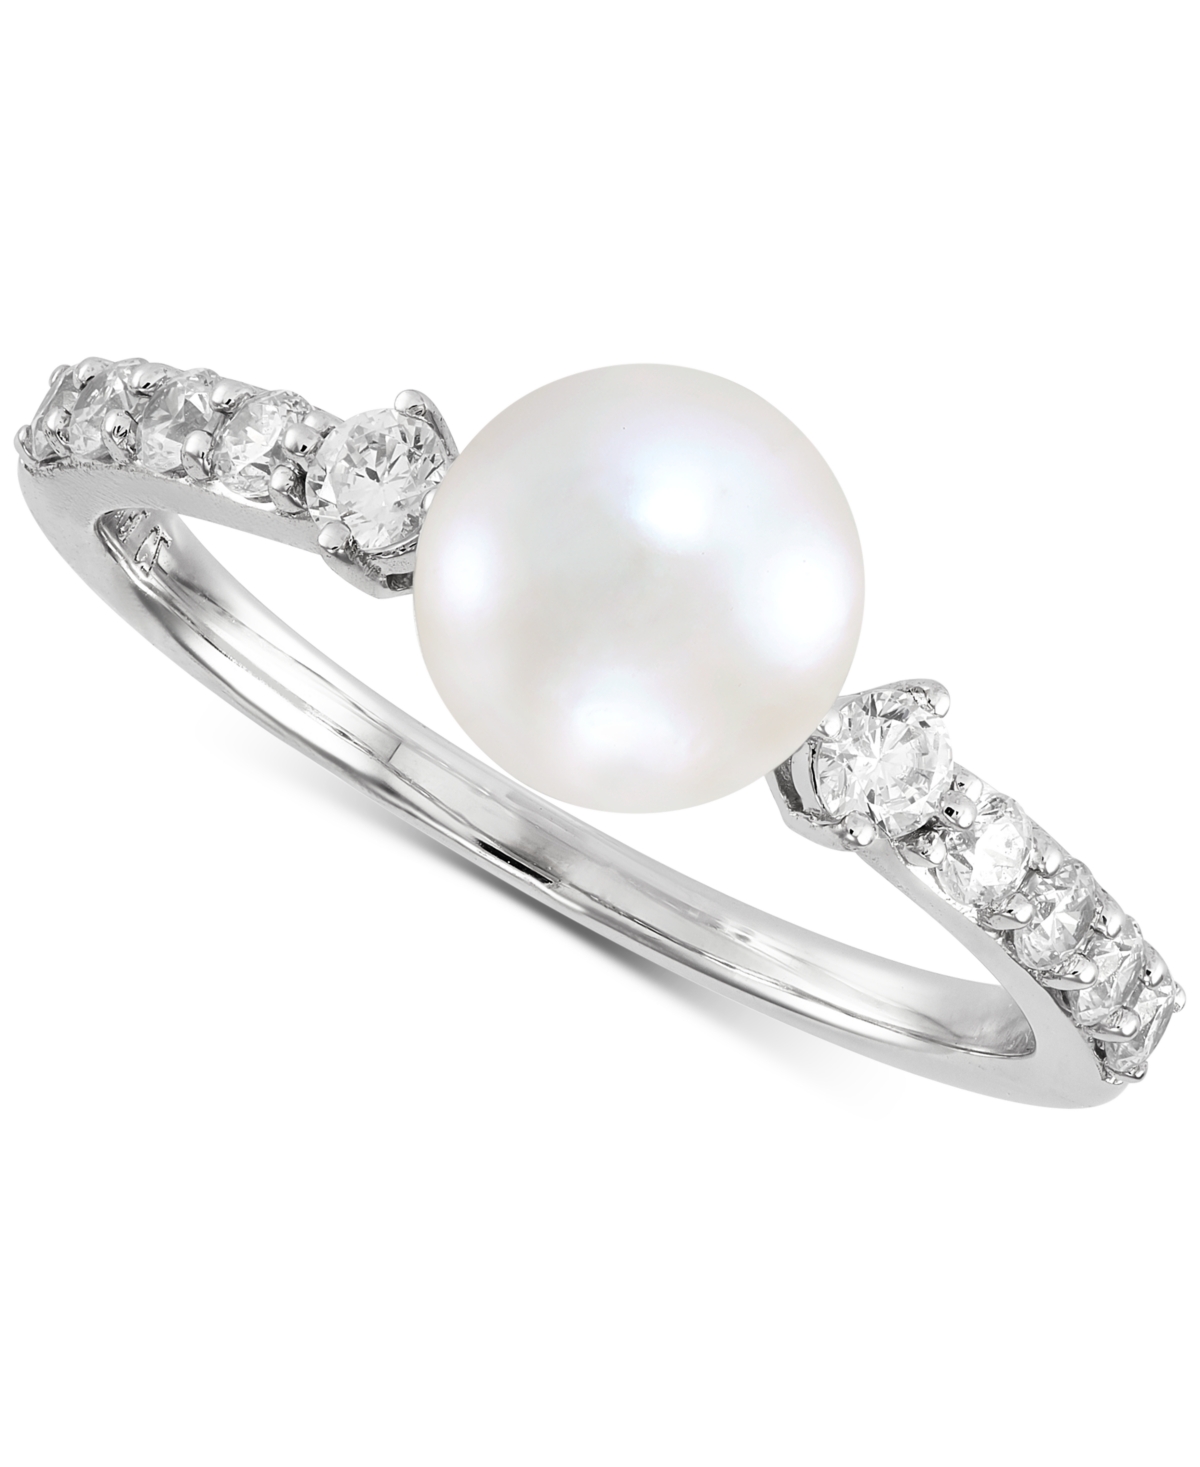 Honora Cultured Freshwater Pearl (7mm) & Diamond (1/3 ct. t.w.) Ring in 14k White Gold